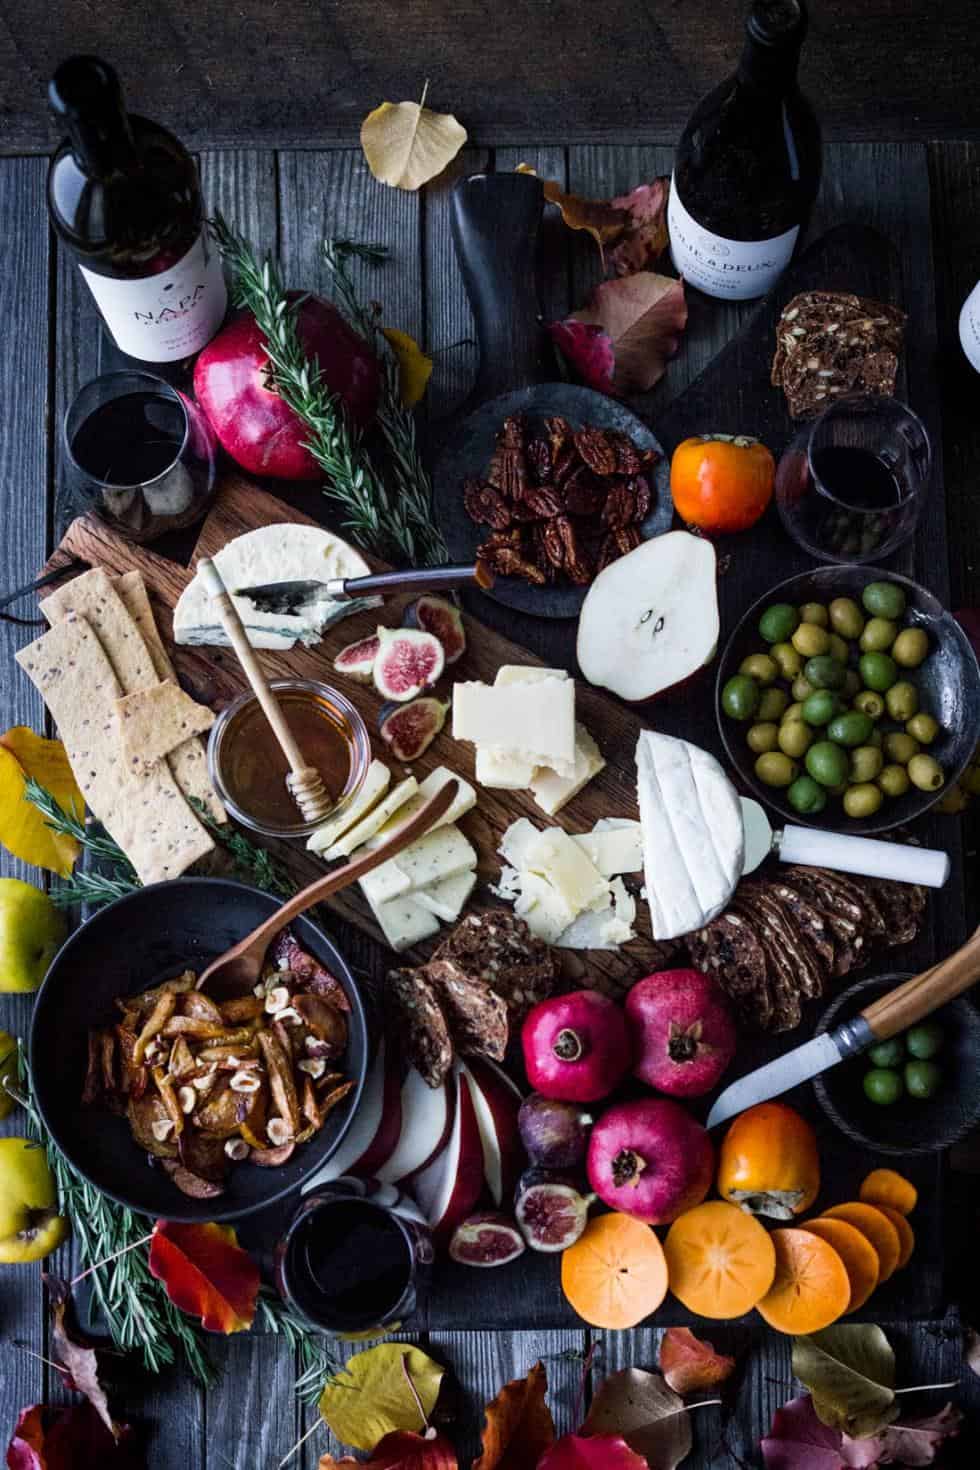 19 Best Charcuterie Board Ideas, Perfect for Holidays - Sharp Aspirant